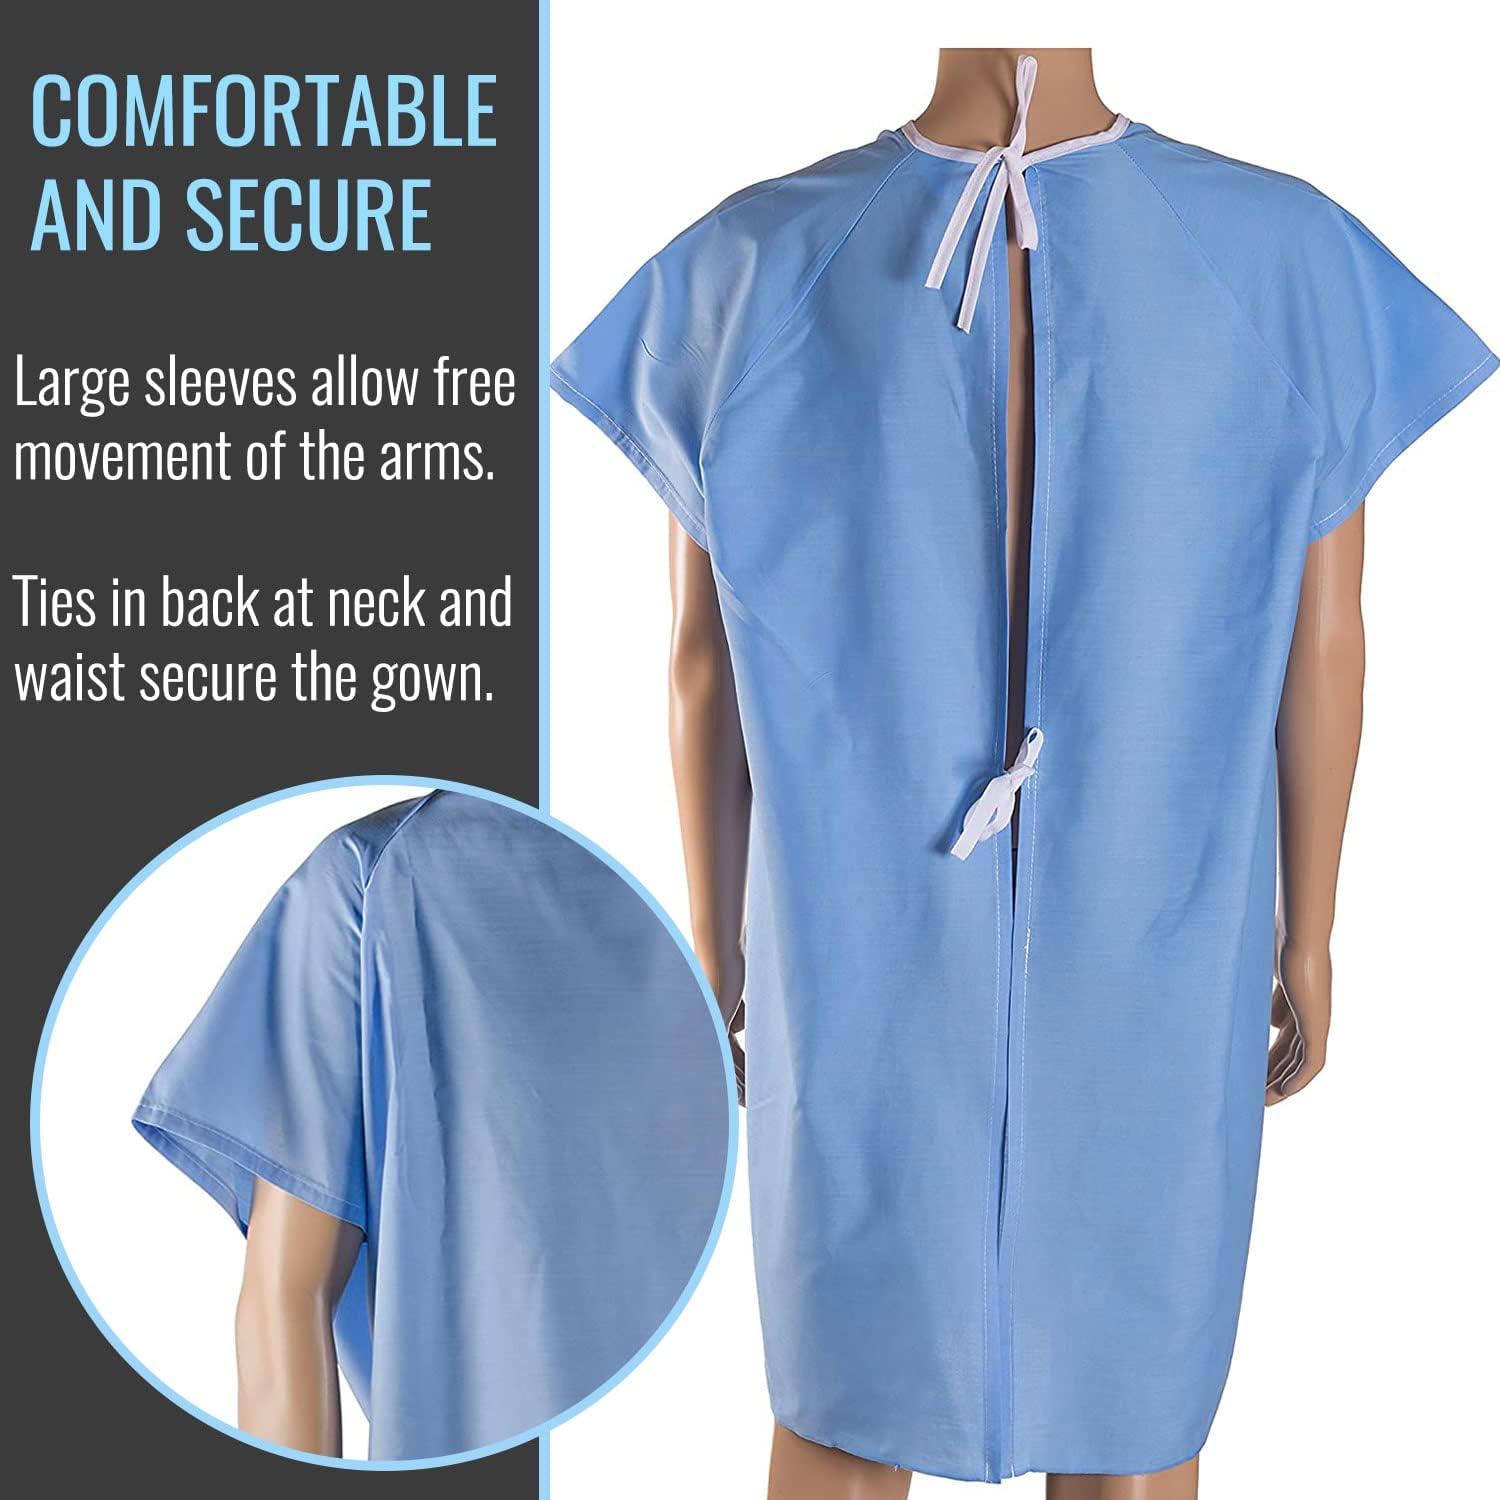 Buy Disposable Isolation Gowns at Best Price in Chennai | PPE Gowns